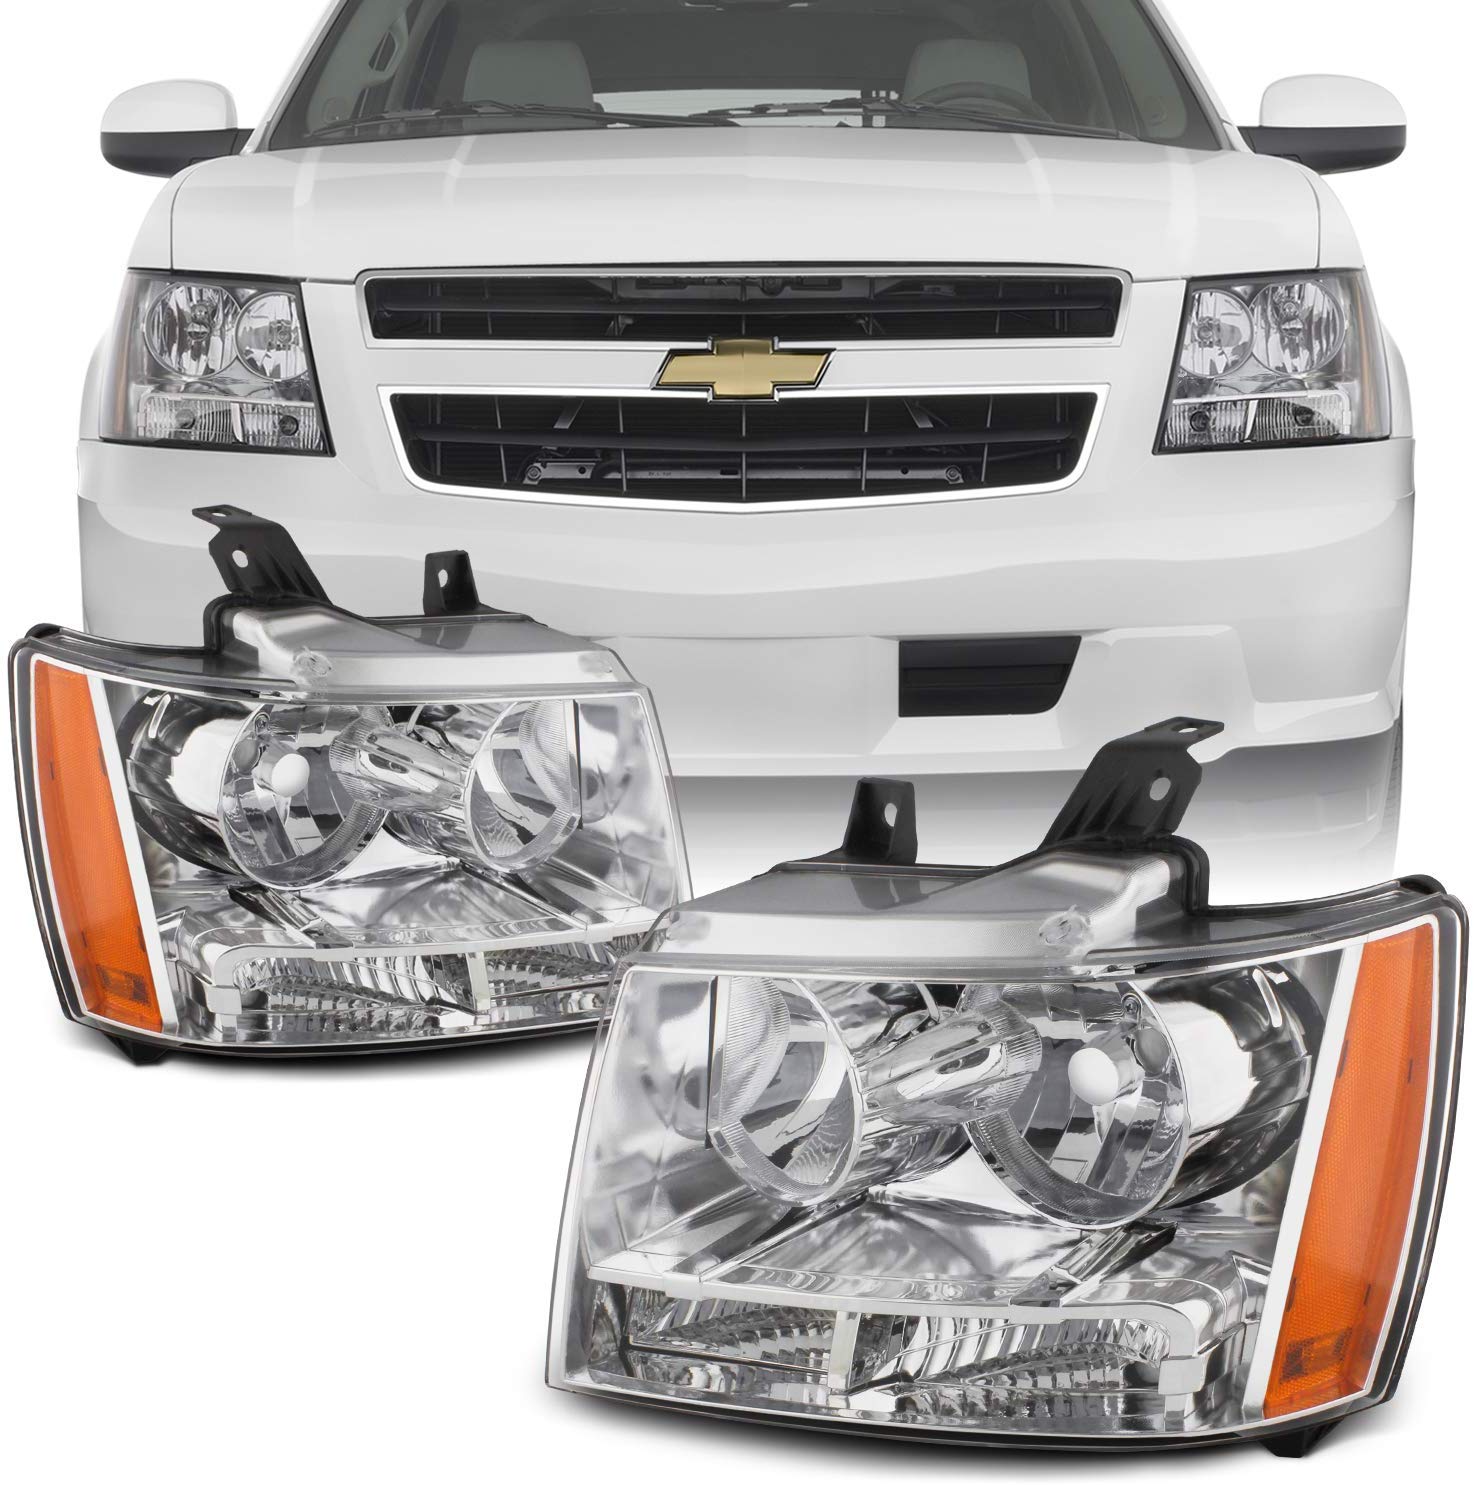 For 07-13 Suburban Tahoe Avalanche Chrome Clear Headlights Front Lamps Direct Replacement Left + Right